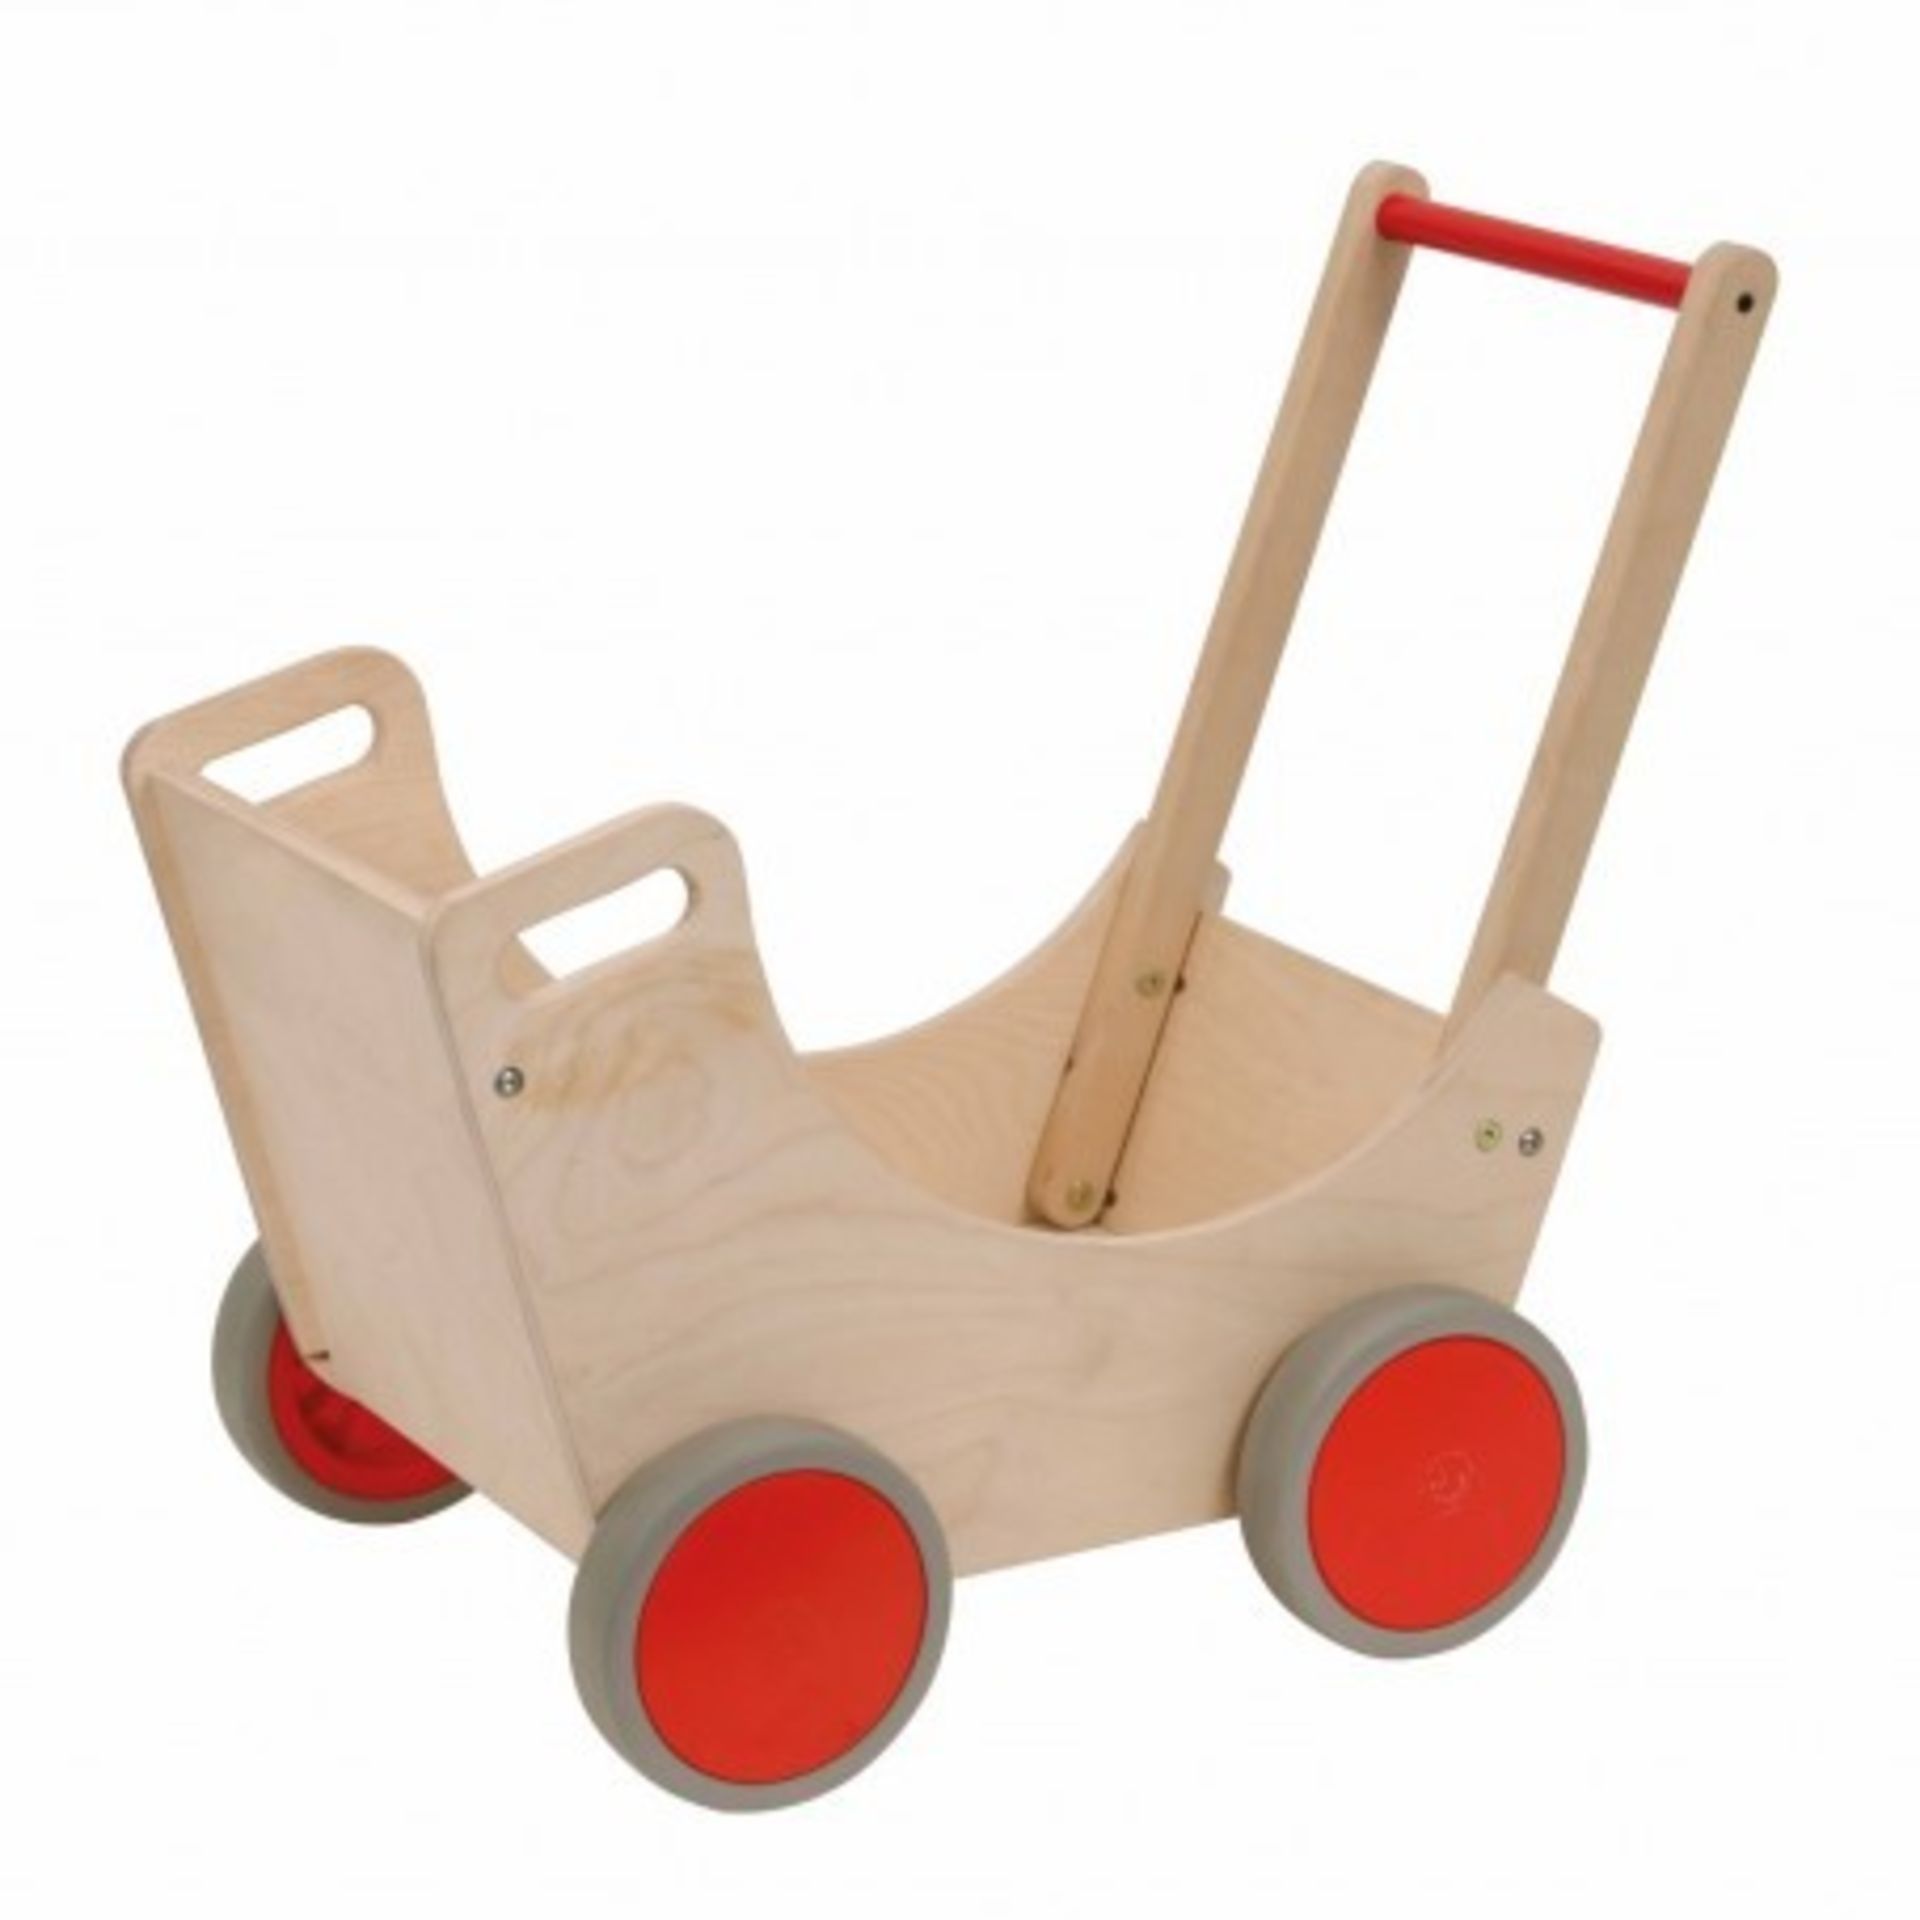 1 AS NEW BOXED EDUCOS DOLLS WOODEN PRAM / RRP £81.02 (VIEWING HIGHLY RECOMMENDED)